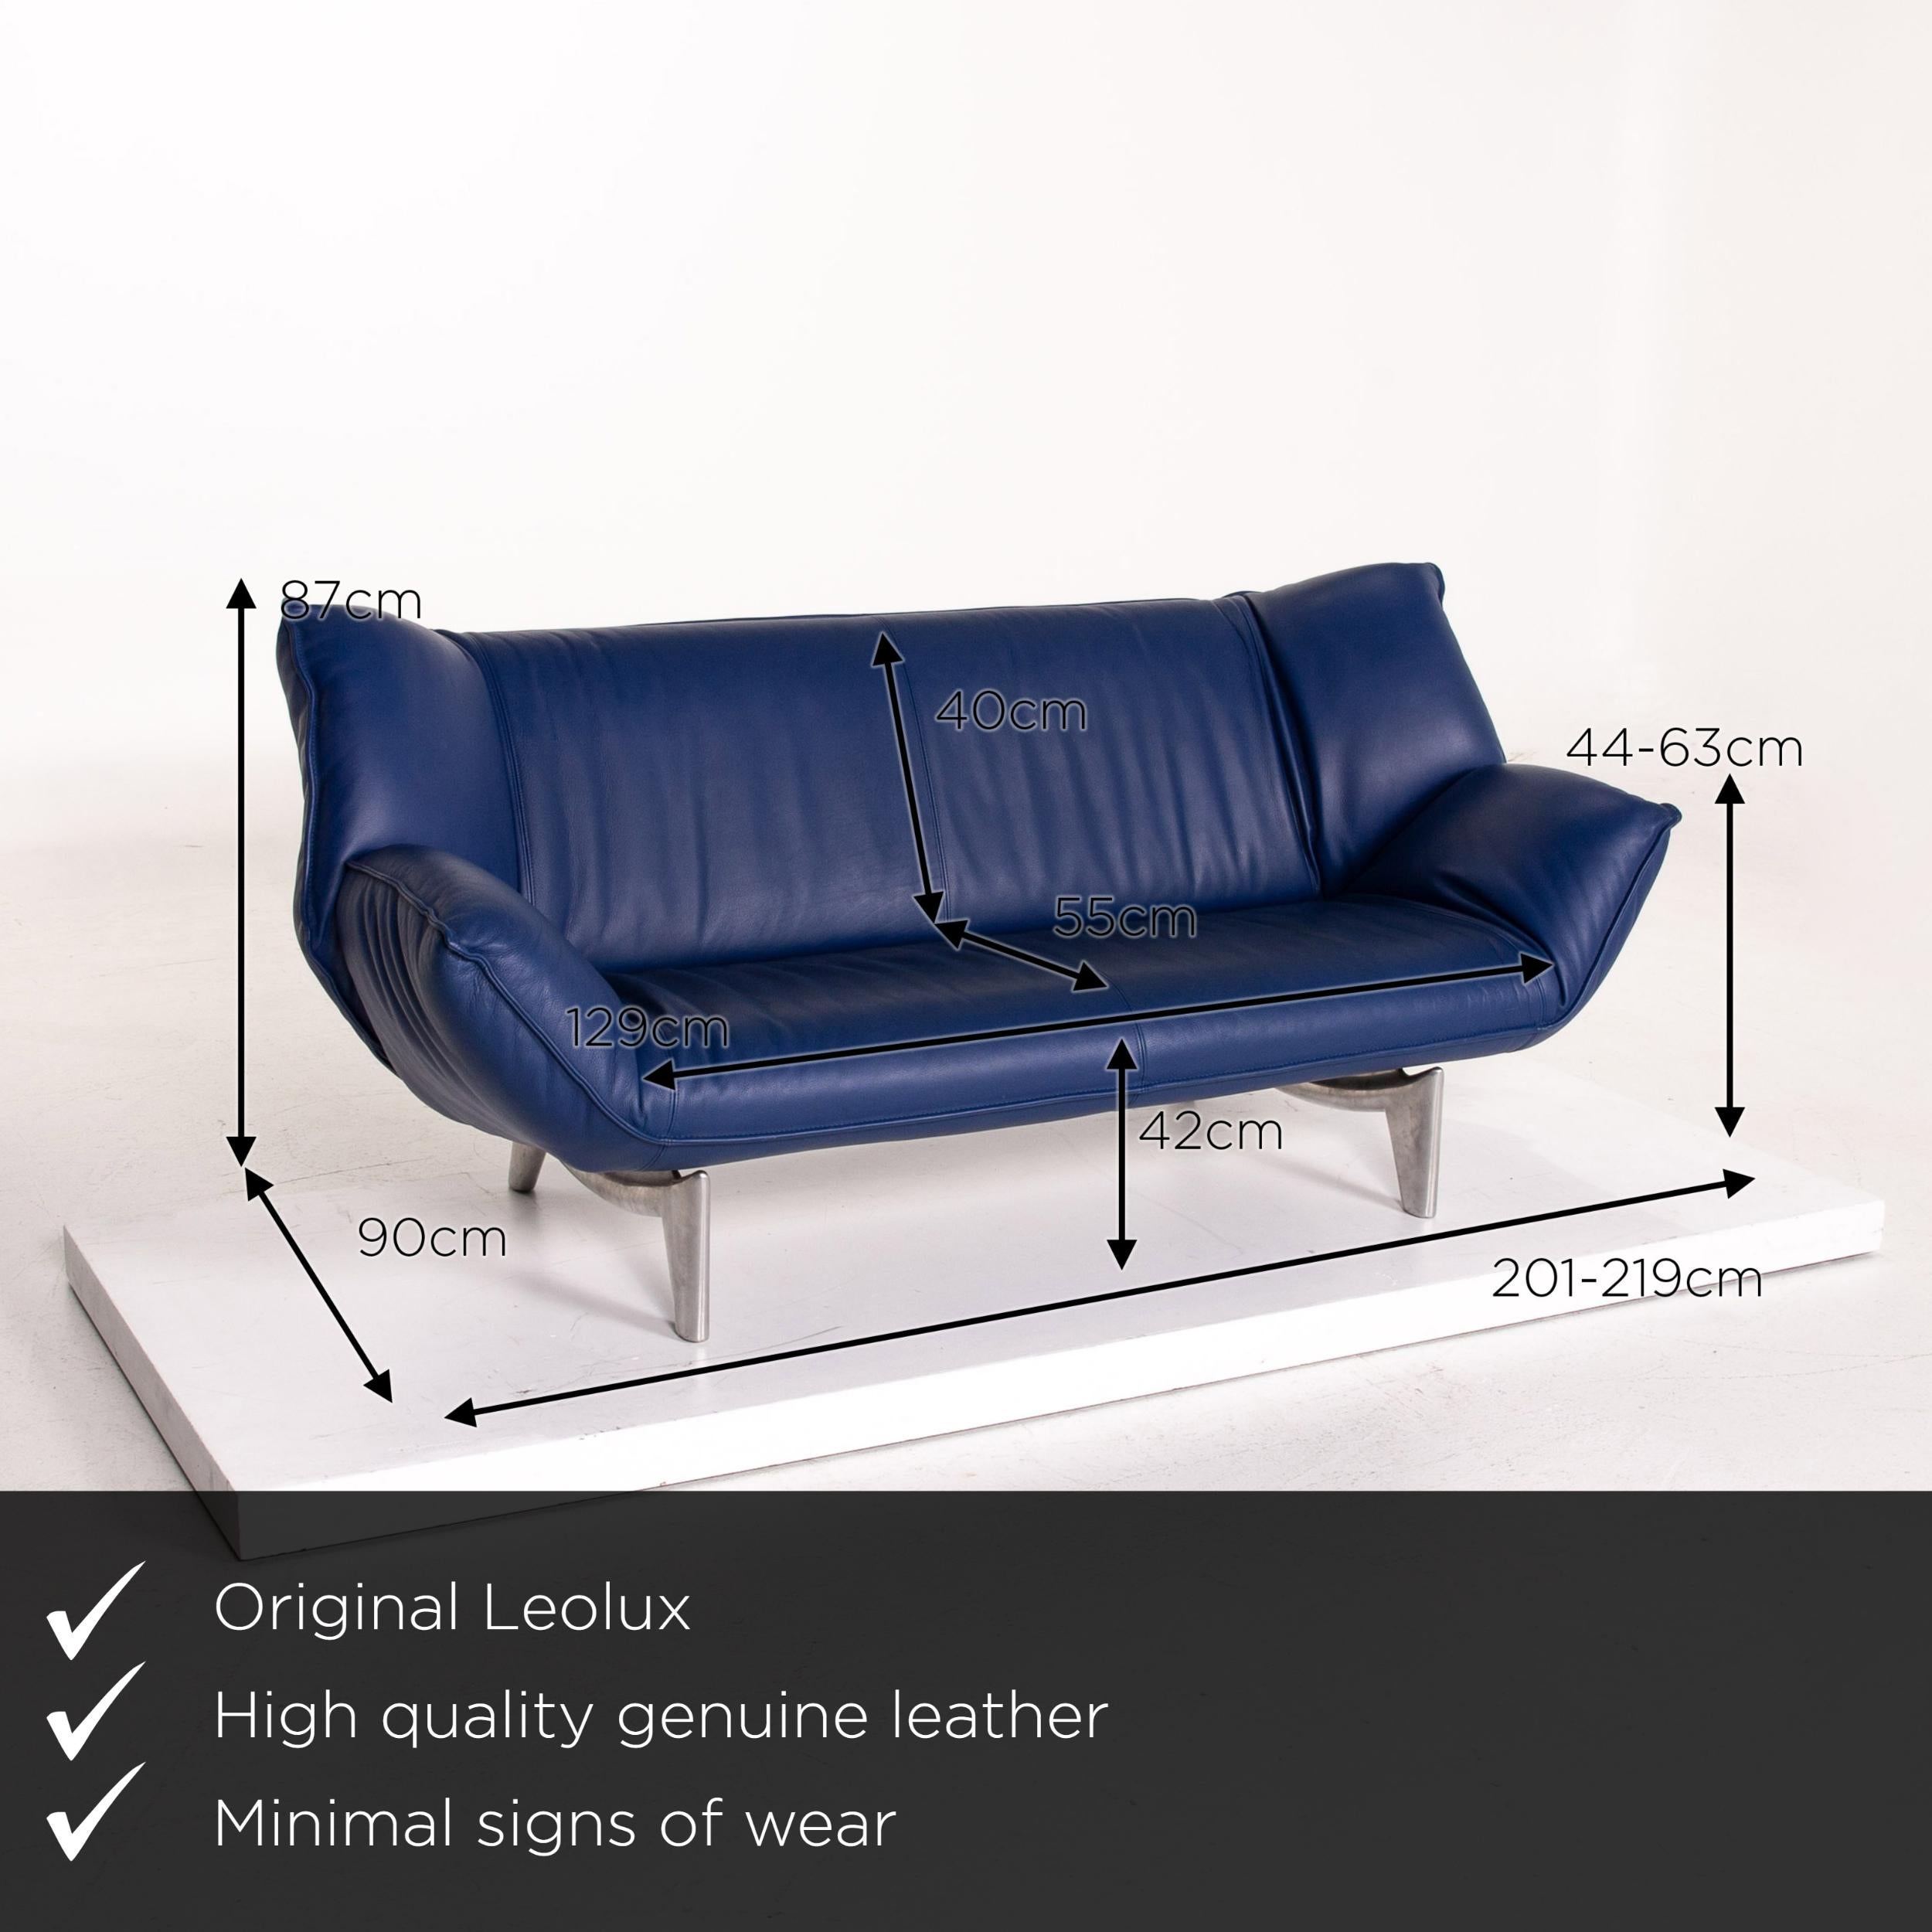 We present to you a Leolux Tango leather sofa set blue dark blue 1 three-seat 1 two-seat.

 

 Product measurements in centimeters:
 

Depth 90
Width 201
Height 87
Seat height 42
Rest height 44
Seat depth 55
Seat width 129
Back height